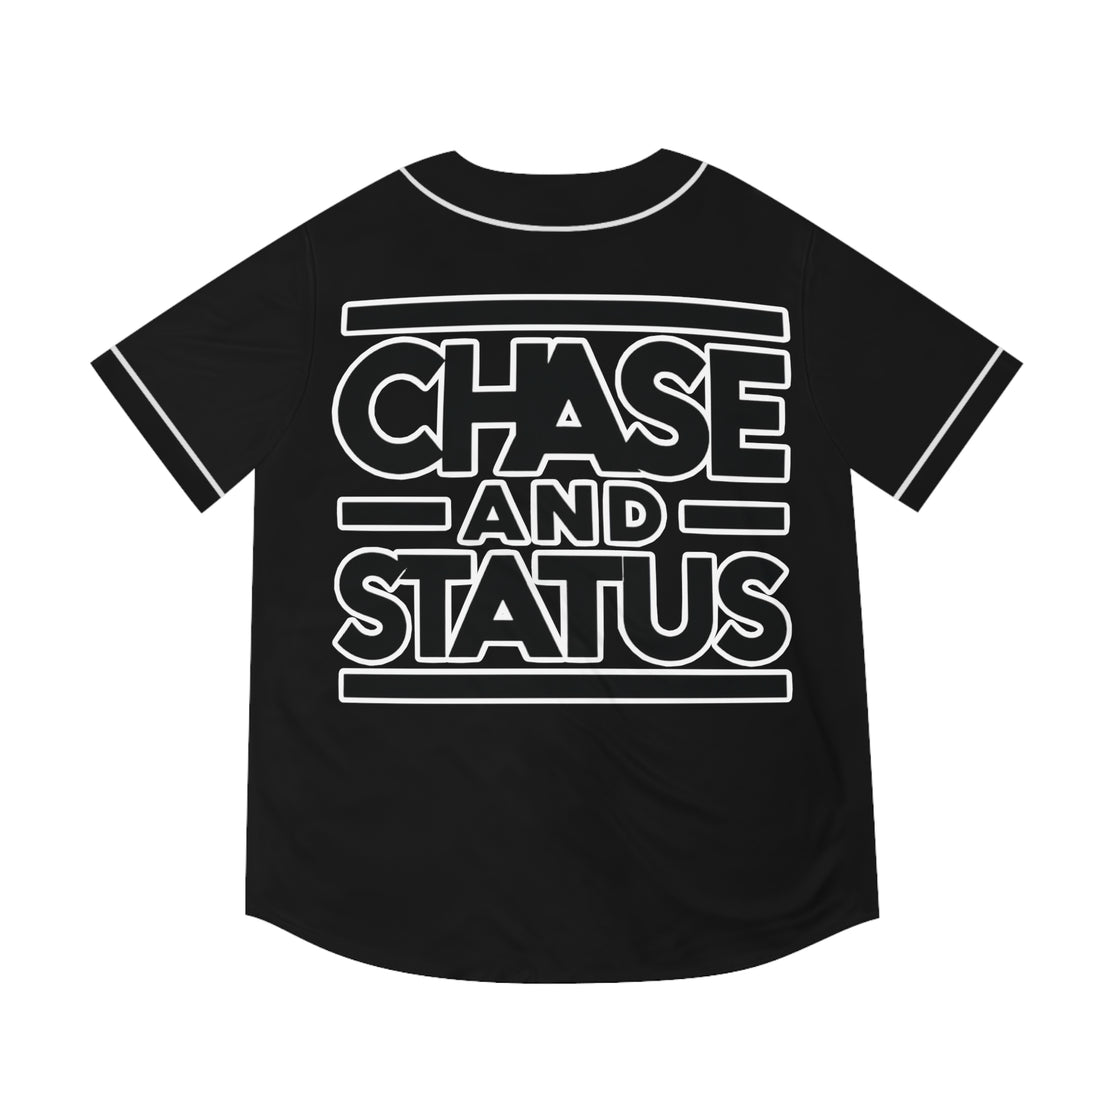 Chase and Statud Jersey Tshirt Rave Shirt Edm